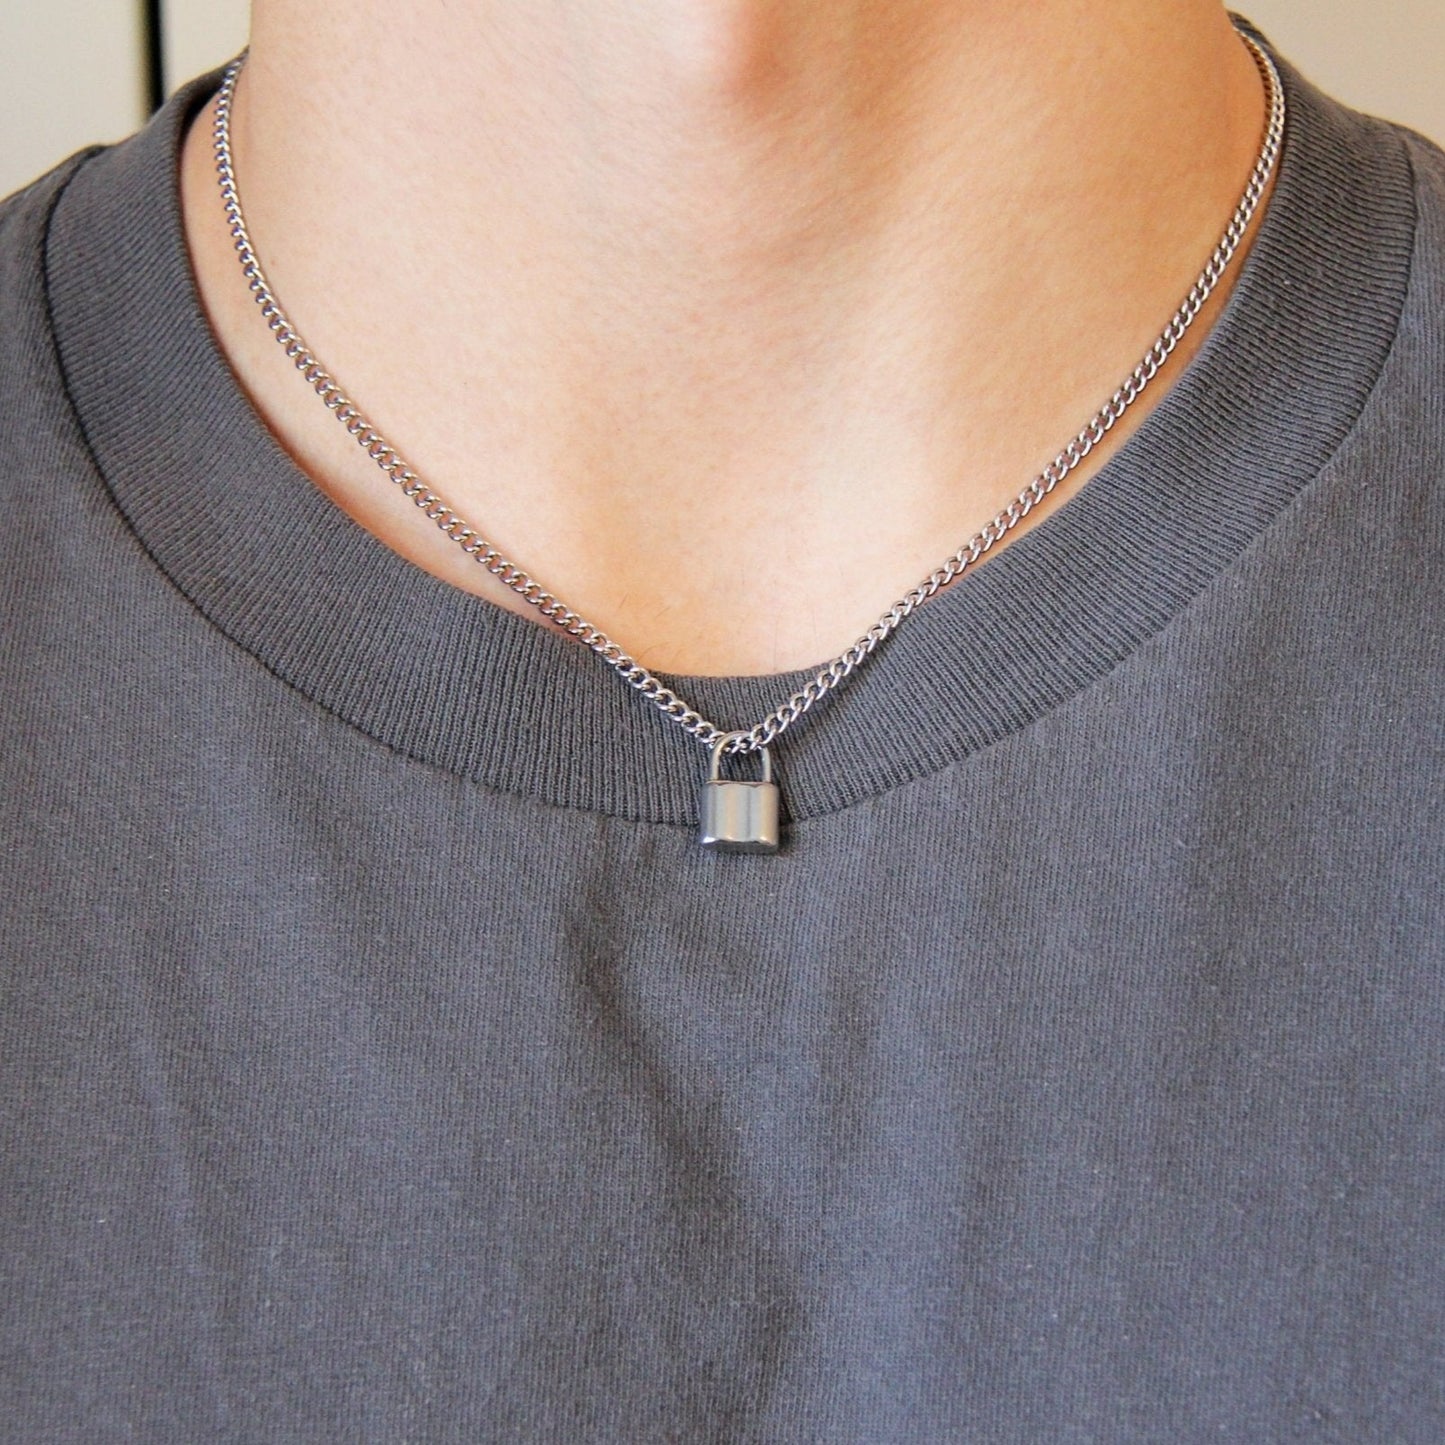 How to wear a padlock as a pendant?